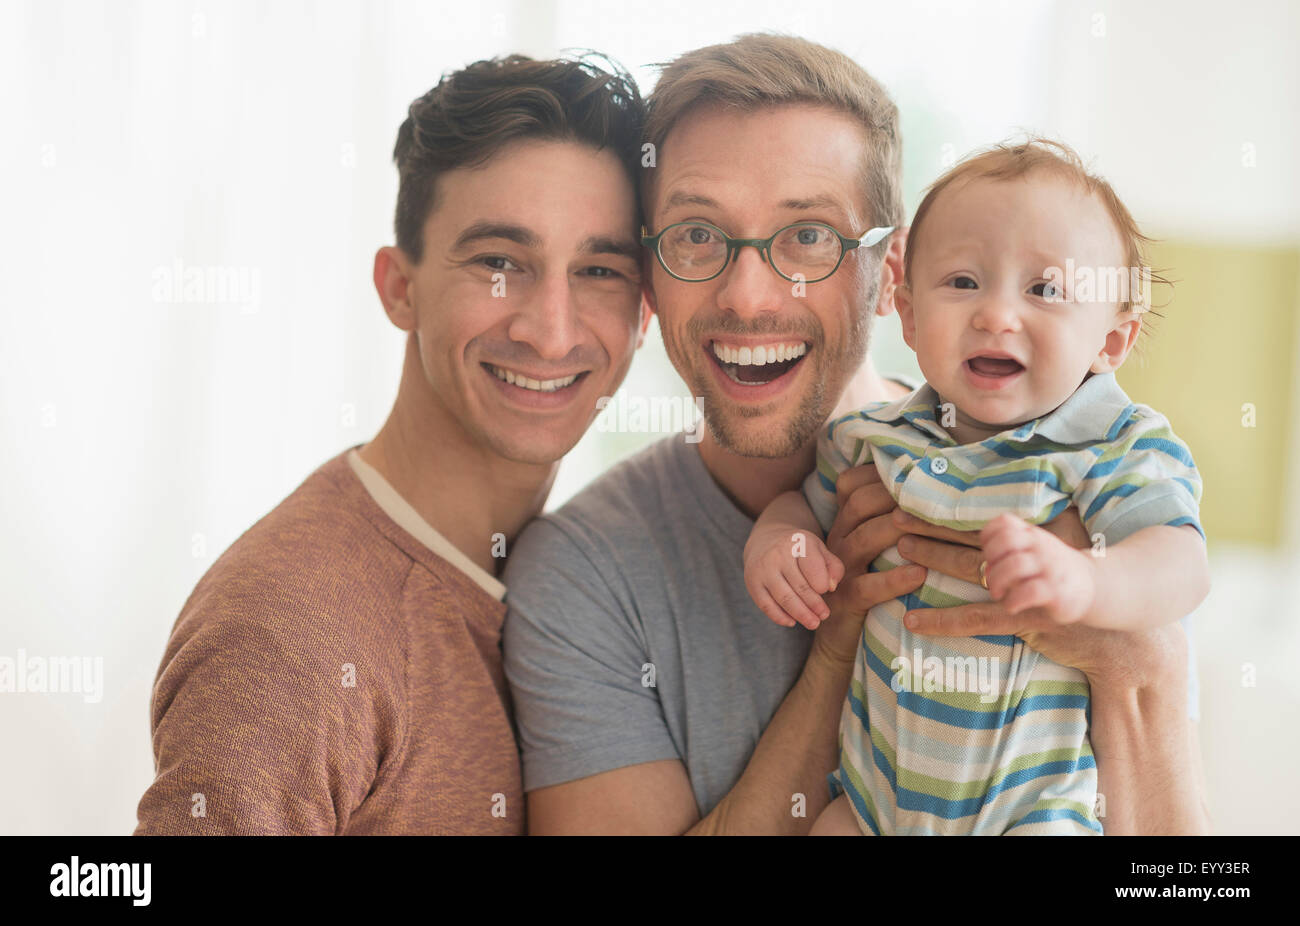 Smiling Caucasian gay fathers holding baby Stock Photo